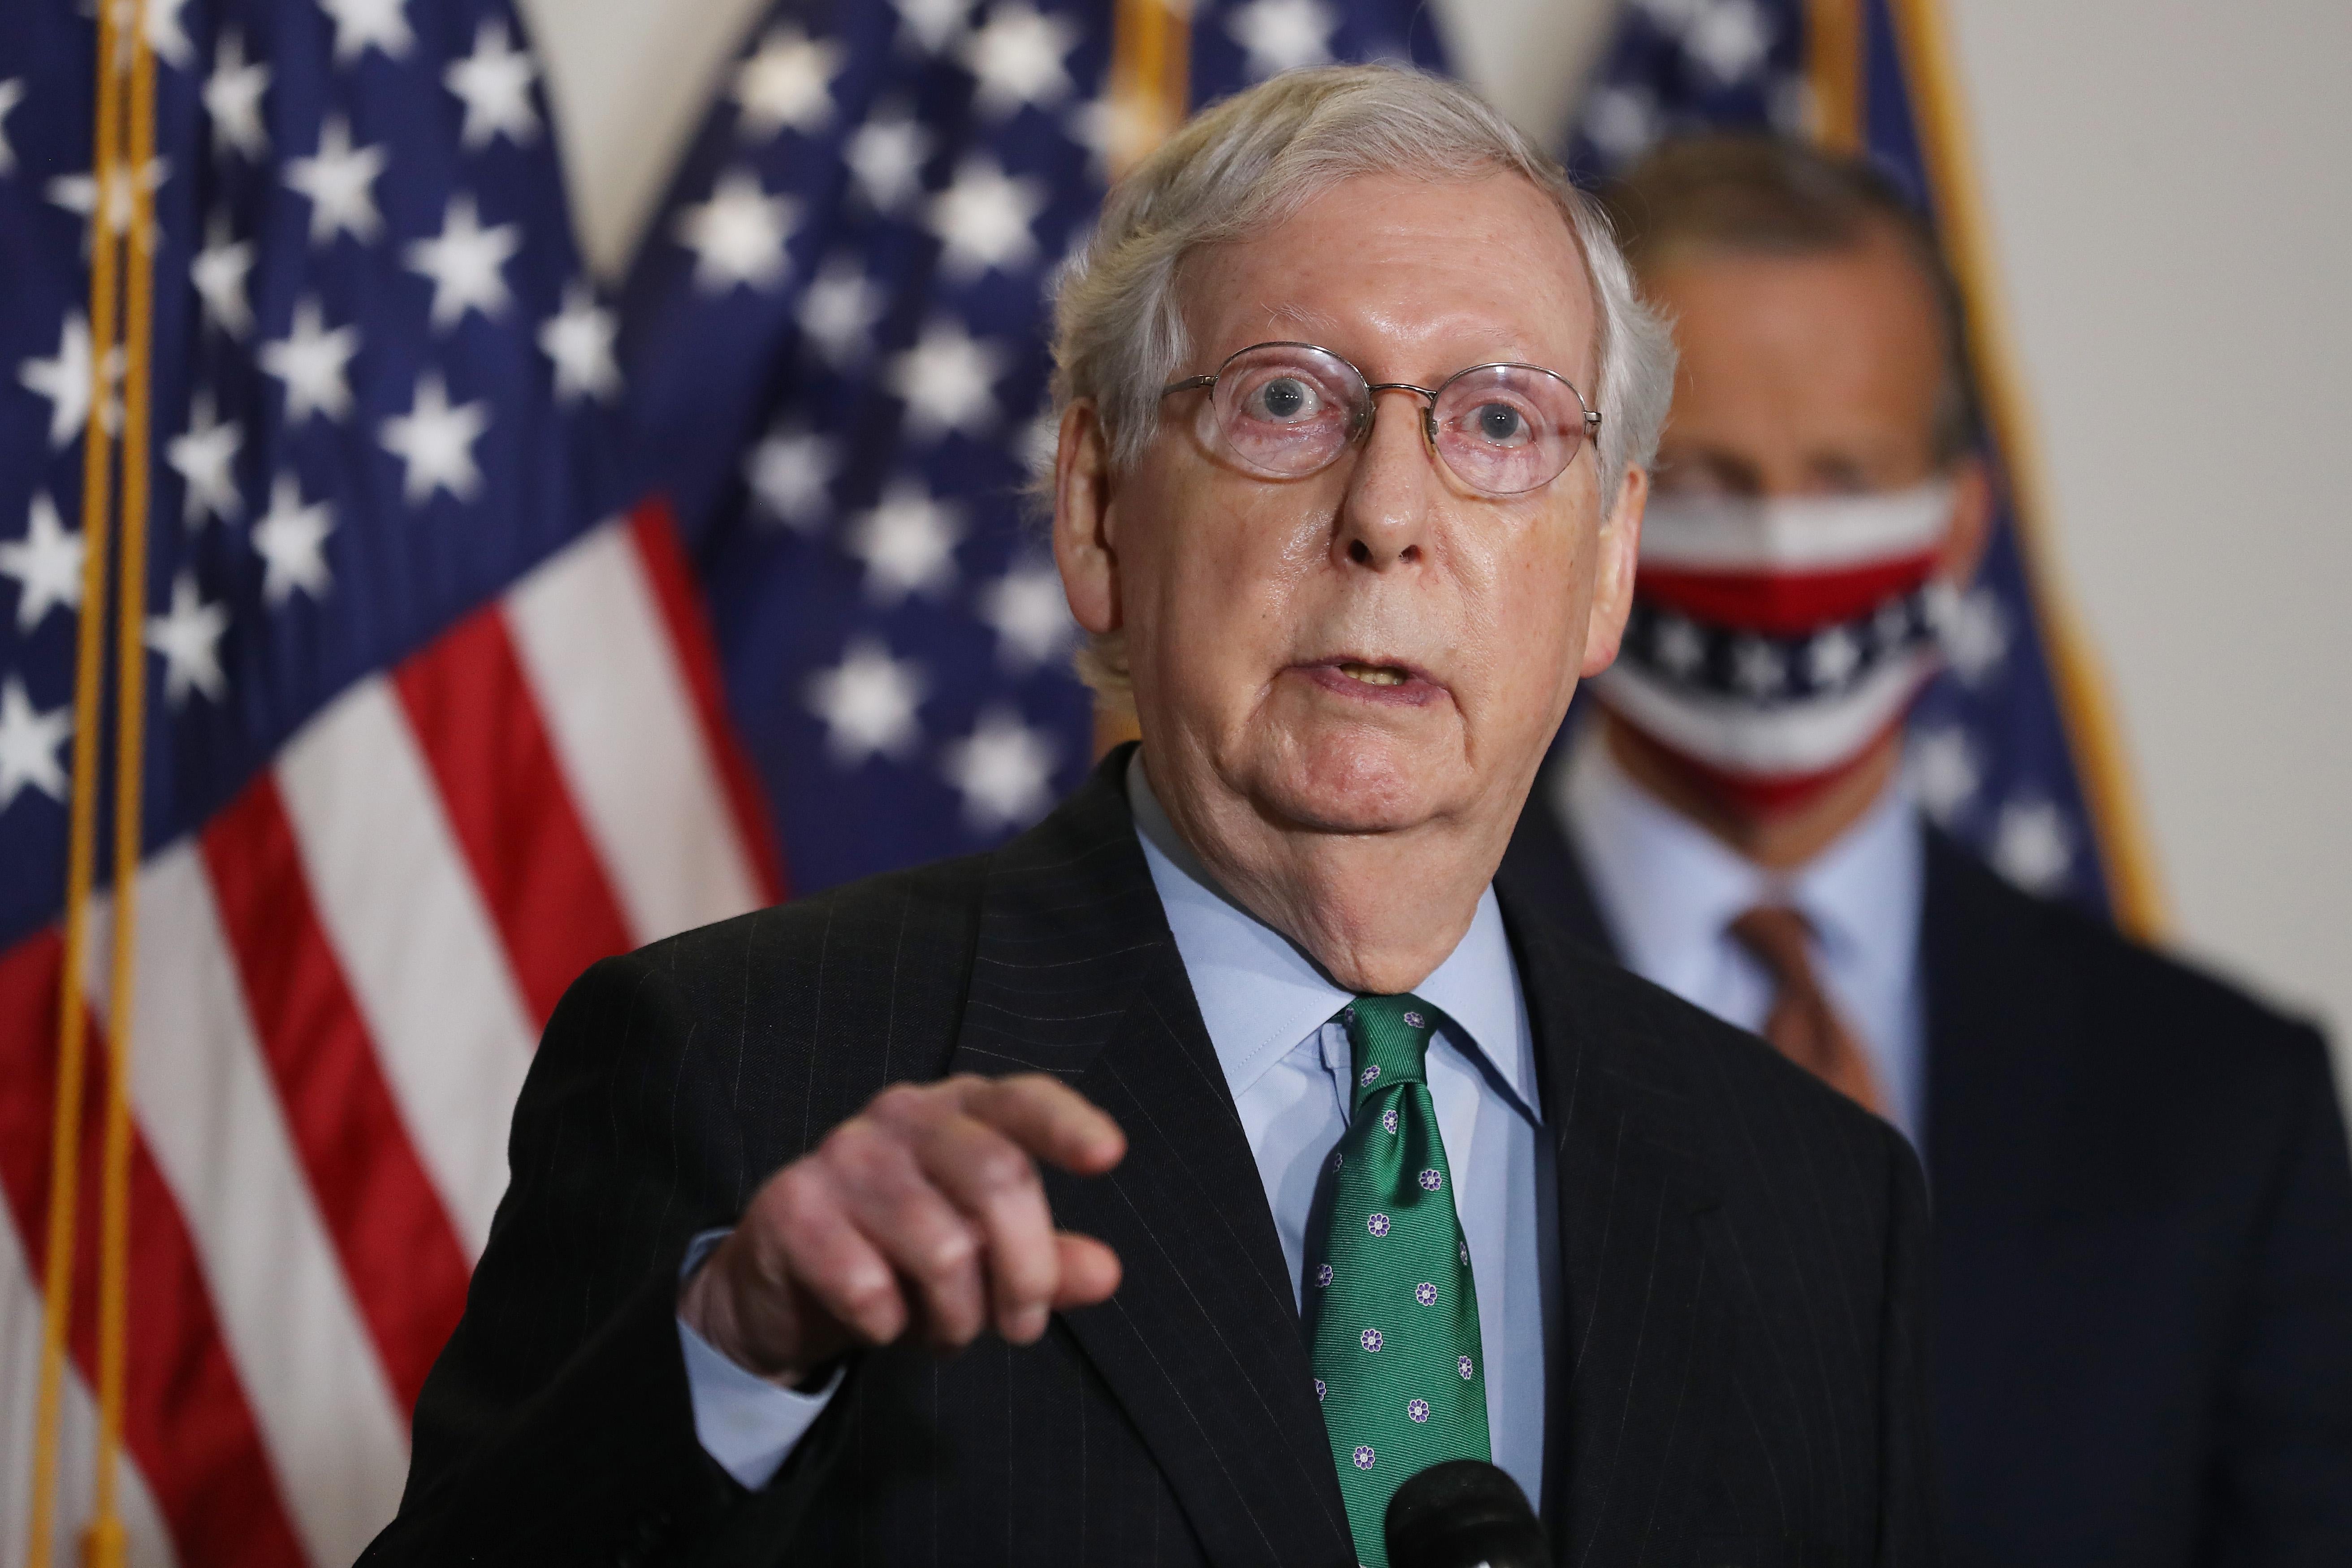 Mitch McConnell points as he speaks at a podium on Capitol Hill on Sept. 30